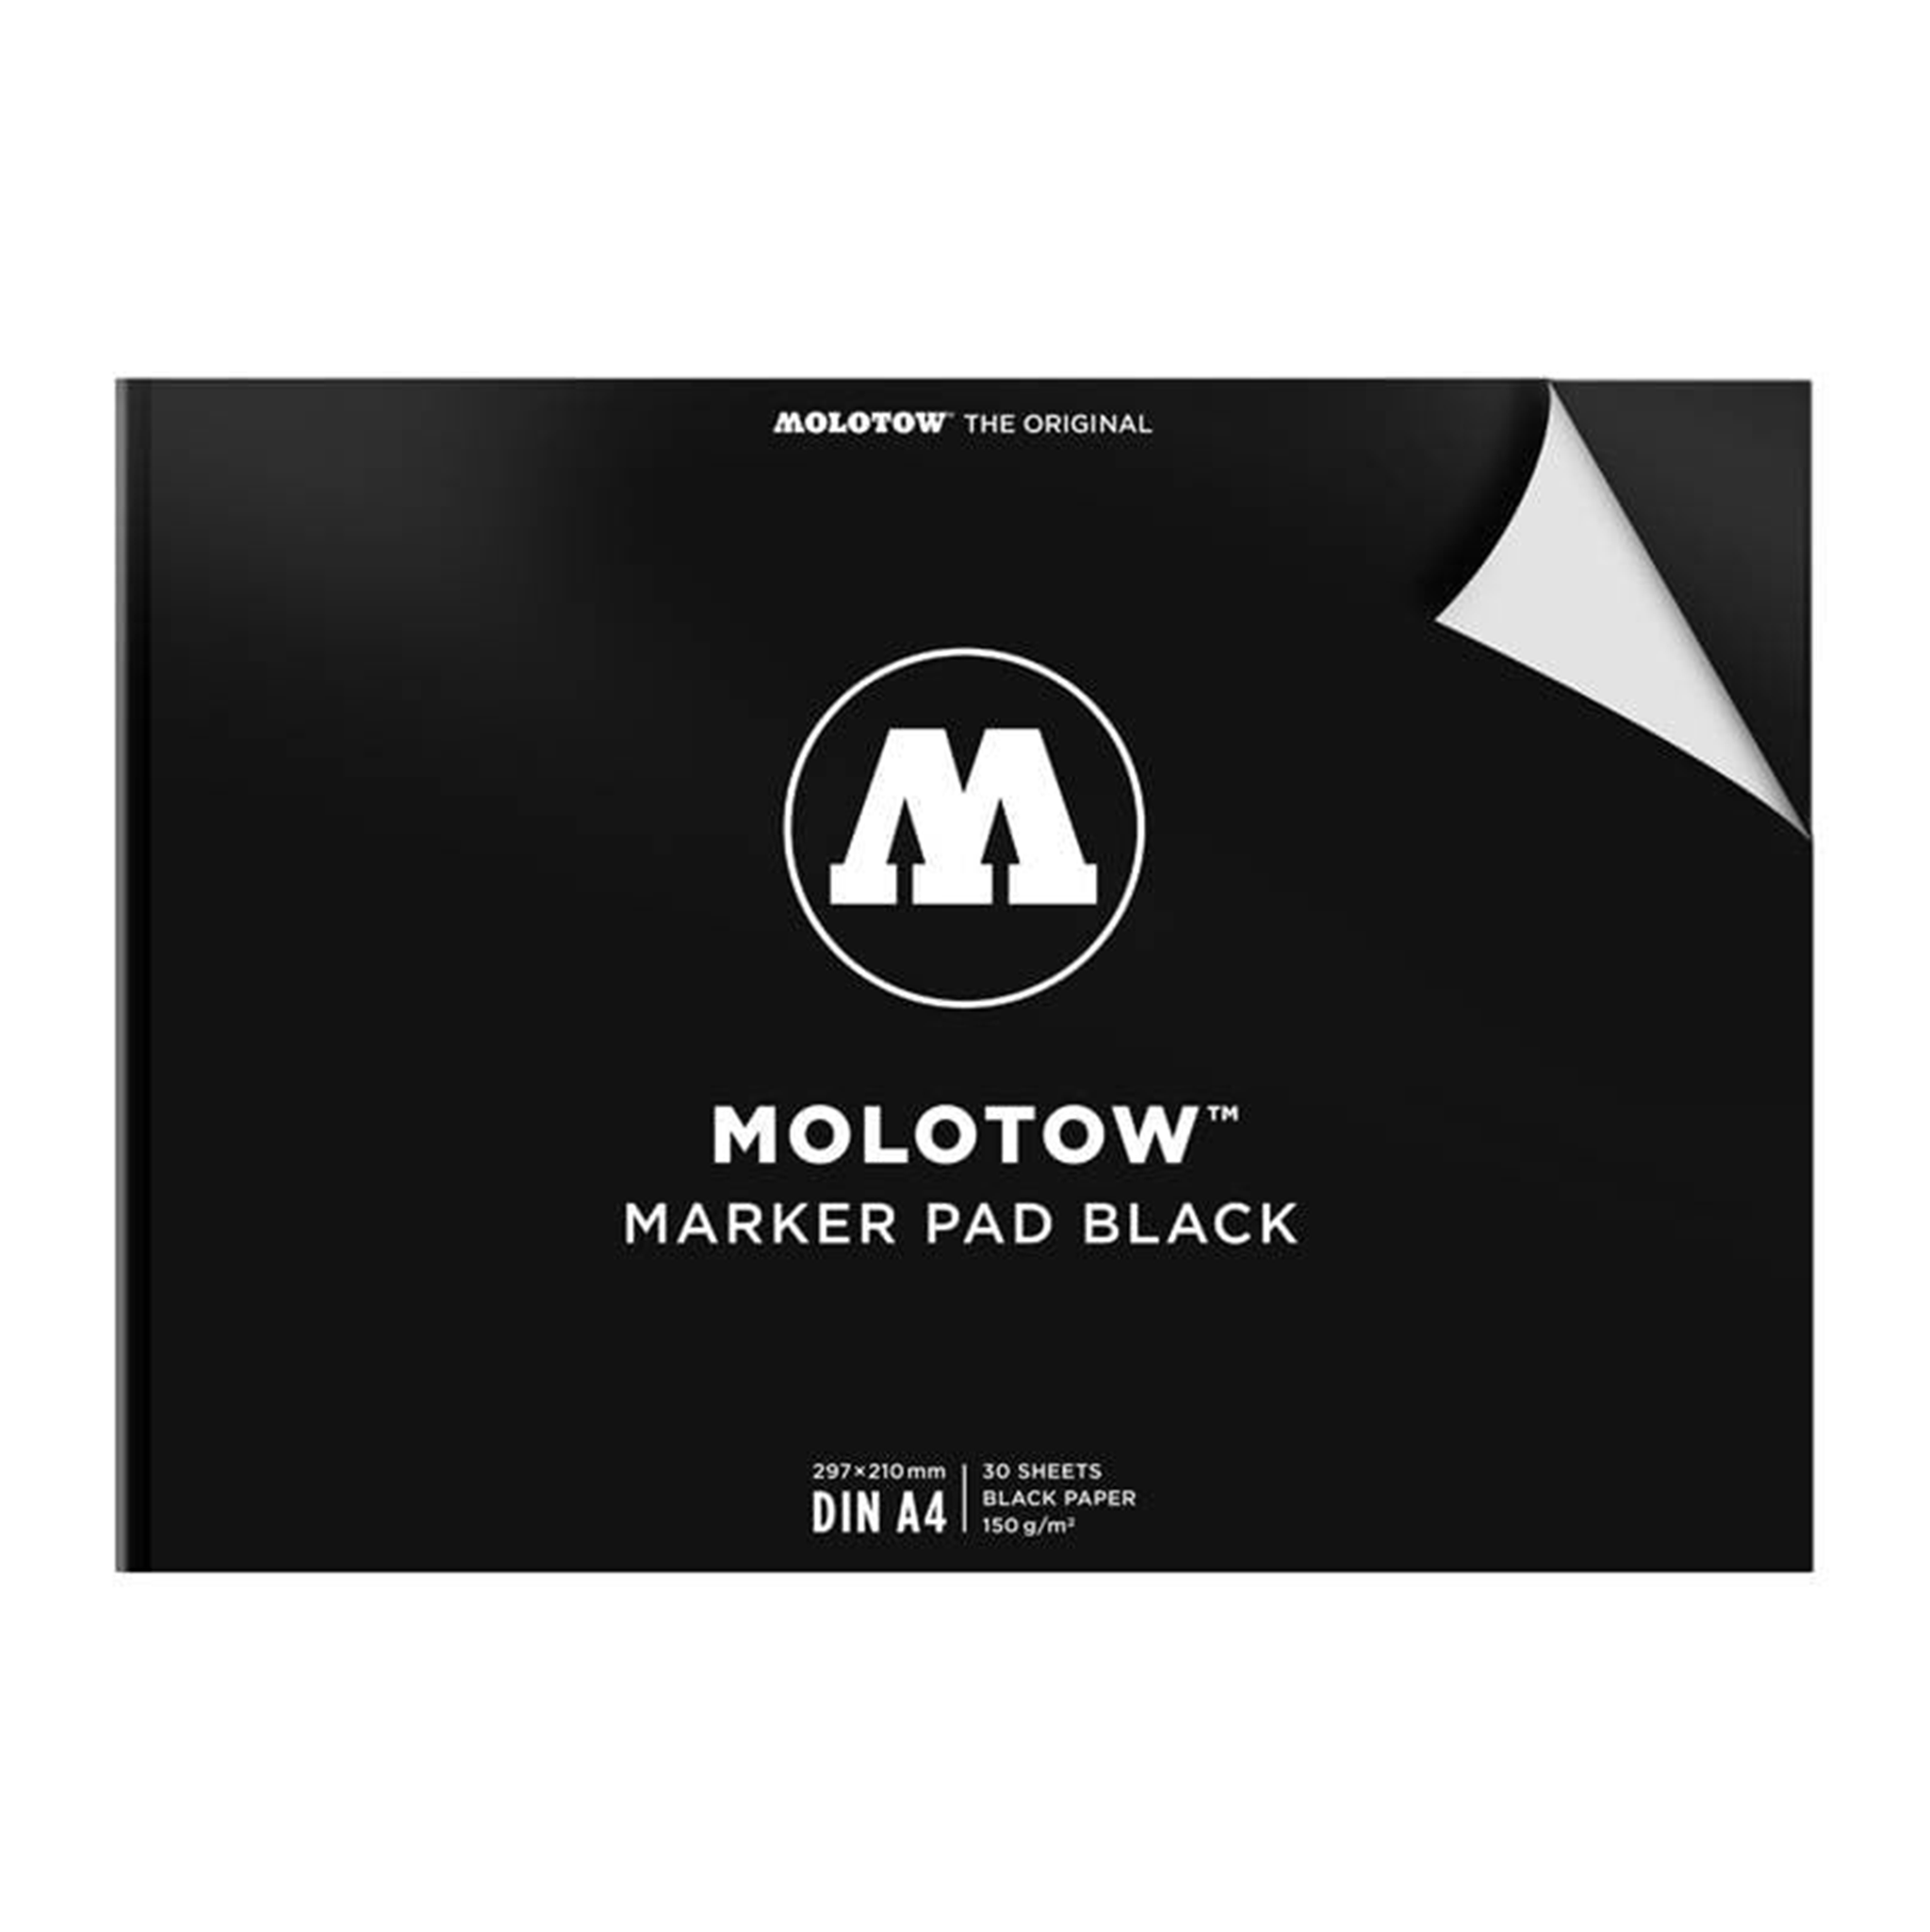 This drawing pad has a black cover with the Molotow logo centered in white. On the front it reads "MOLOTOW MARKER PAD BLACK"